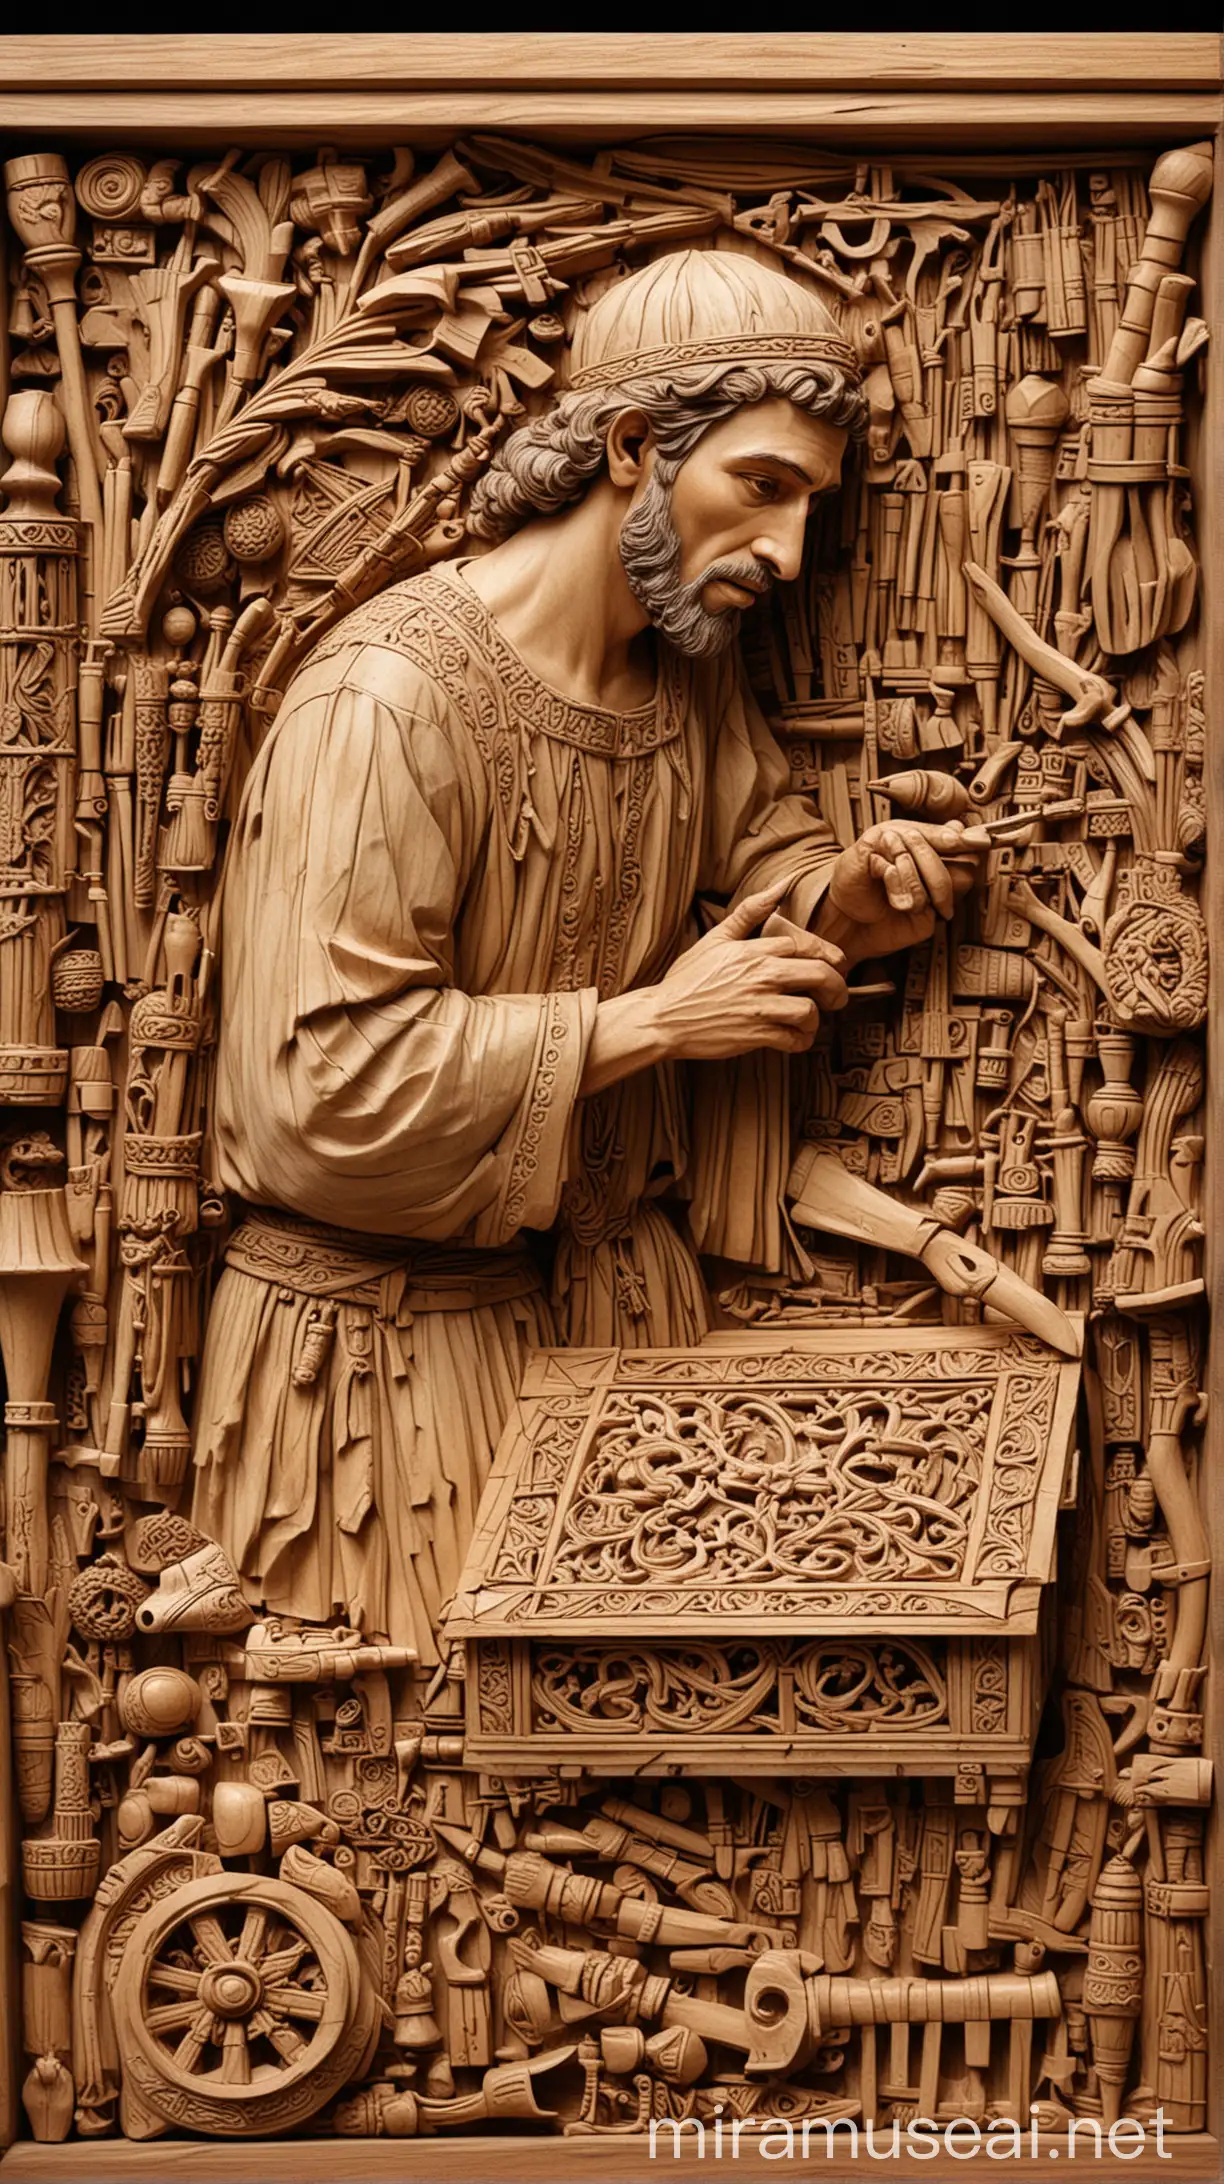 Medieval Craftsman Bezaleel Carving Intricate Wooden Box